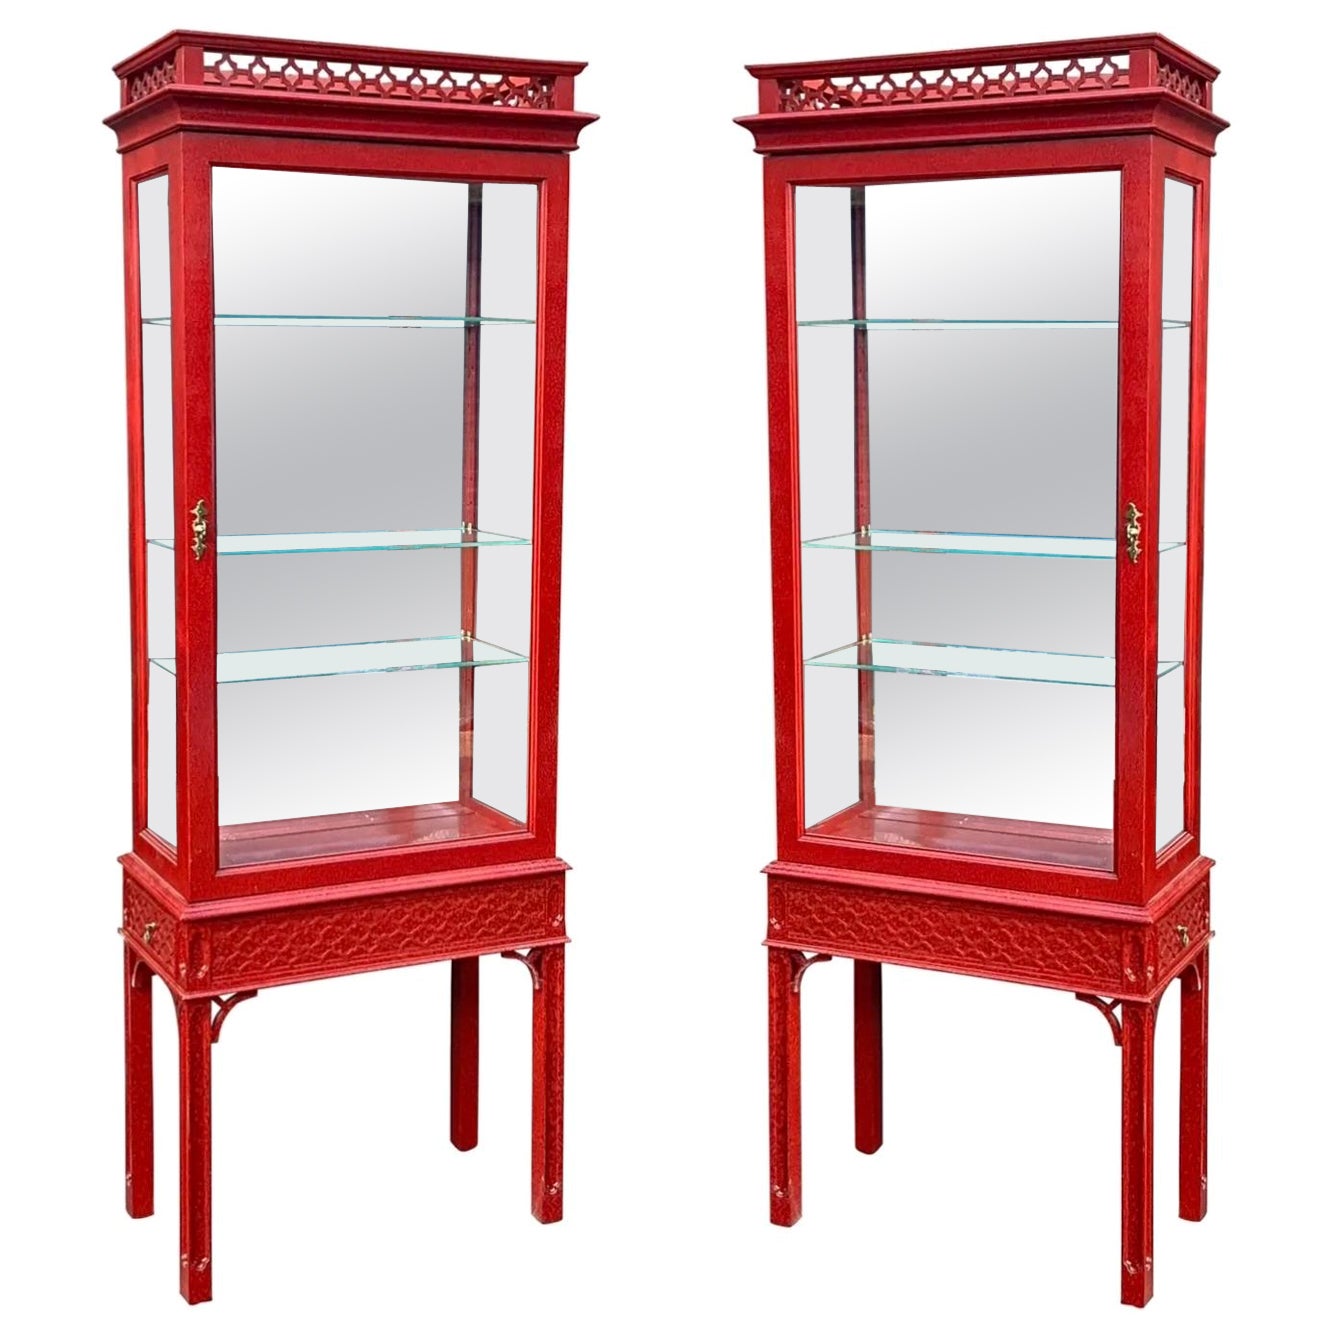 Chinese Chippendale Syle Vitrines  Cabinets Curios by Century Furniture - Pair For Sale